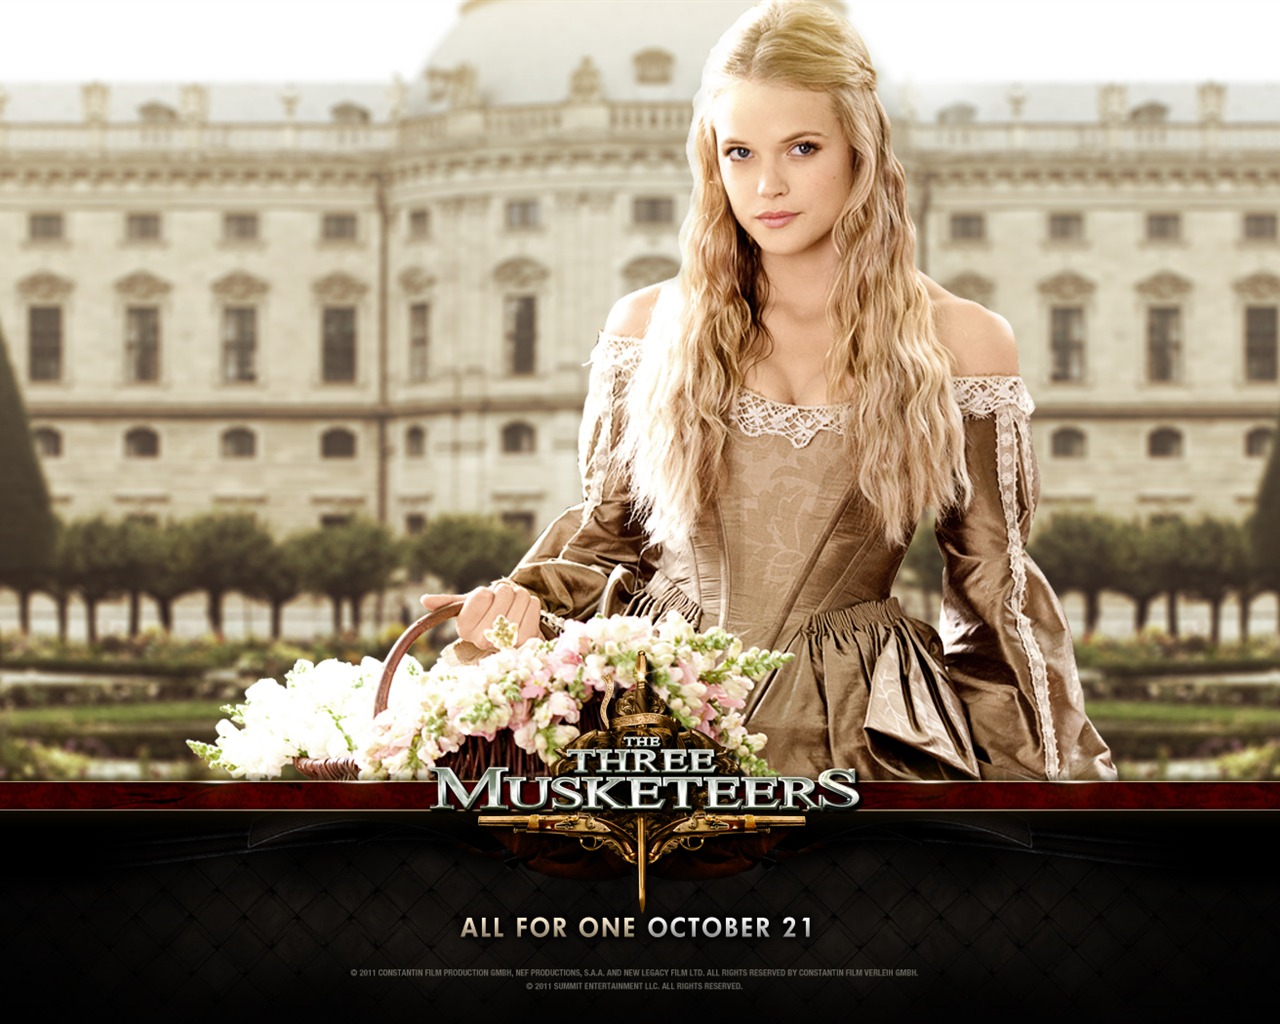 2011 The Three Musketeers wallpapers #3 - 1280x1024